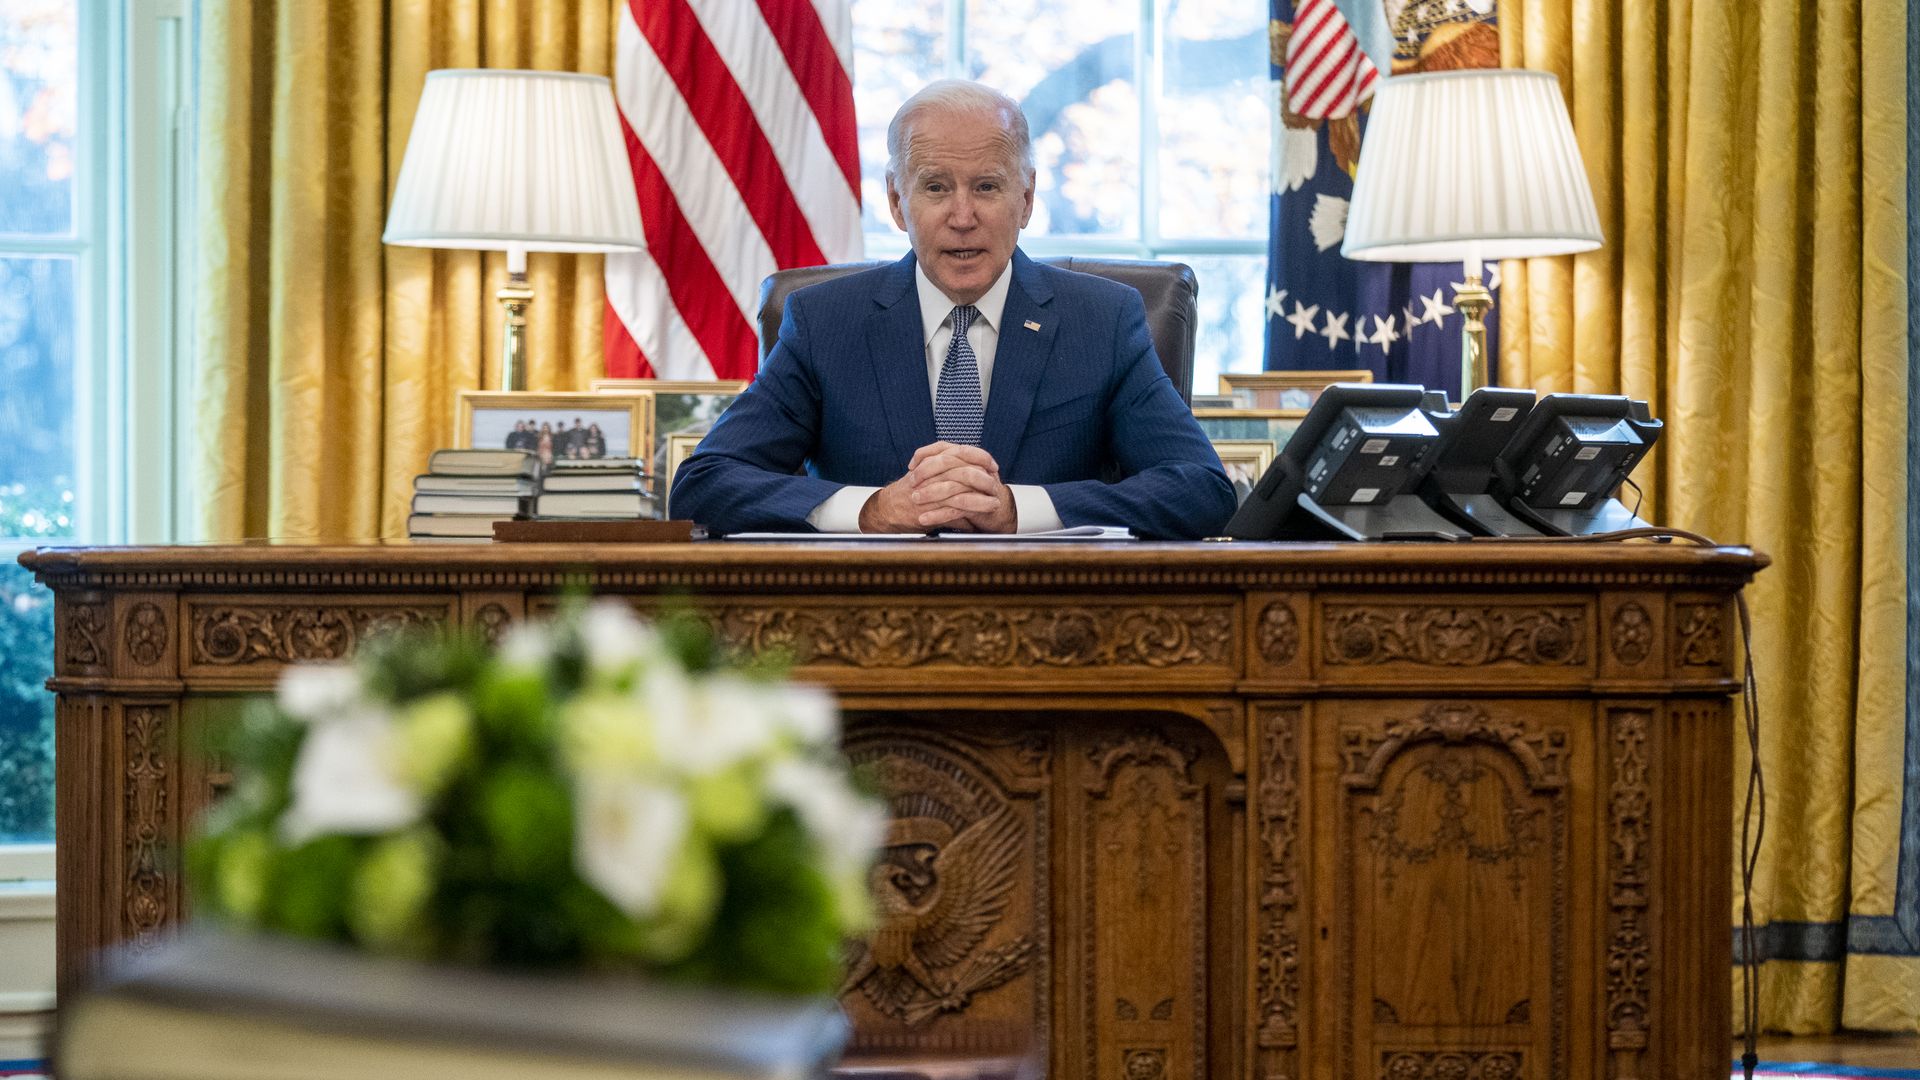 President Joe Biden speaks before signing an executive order on delivering government services in the Oval Office of the White House in Washington, D.C., U.S., on Monday, Dec. 13, 2021.